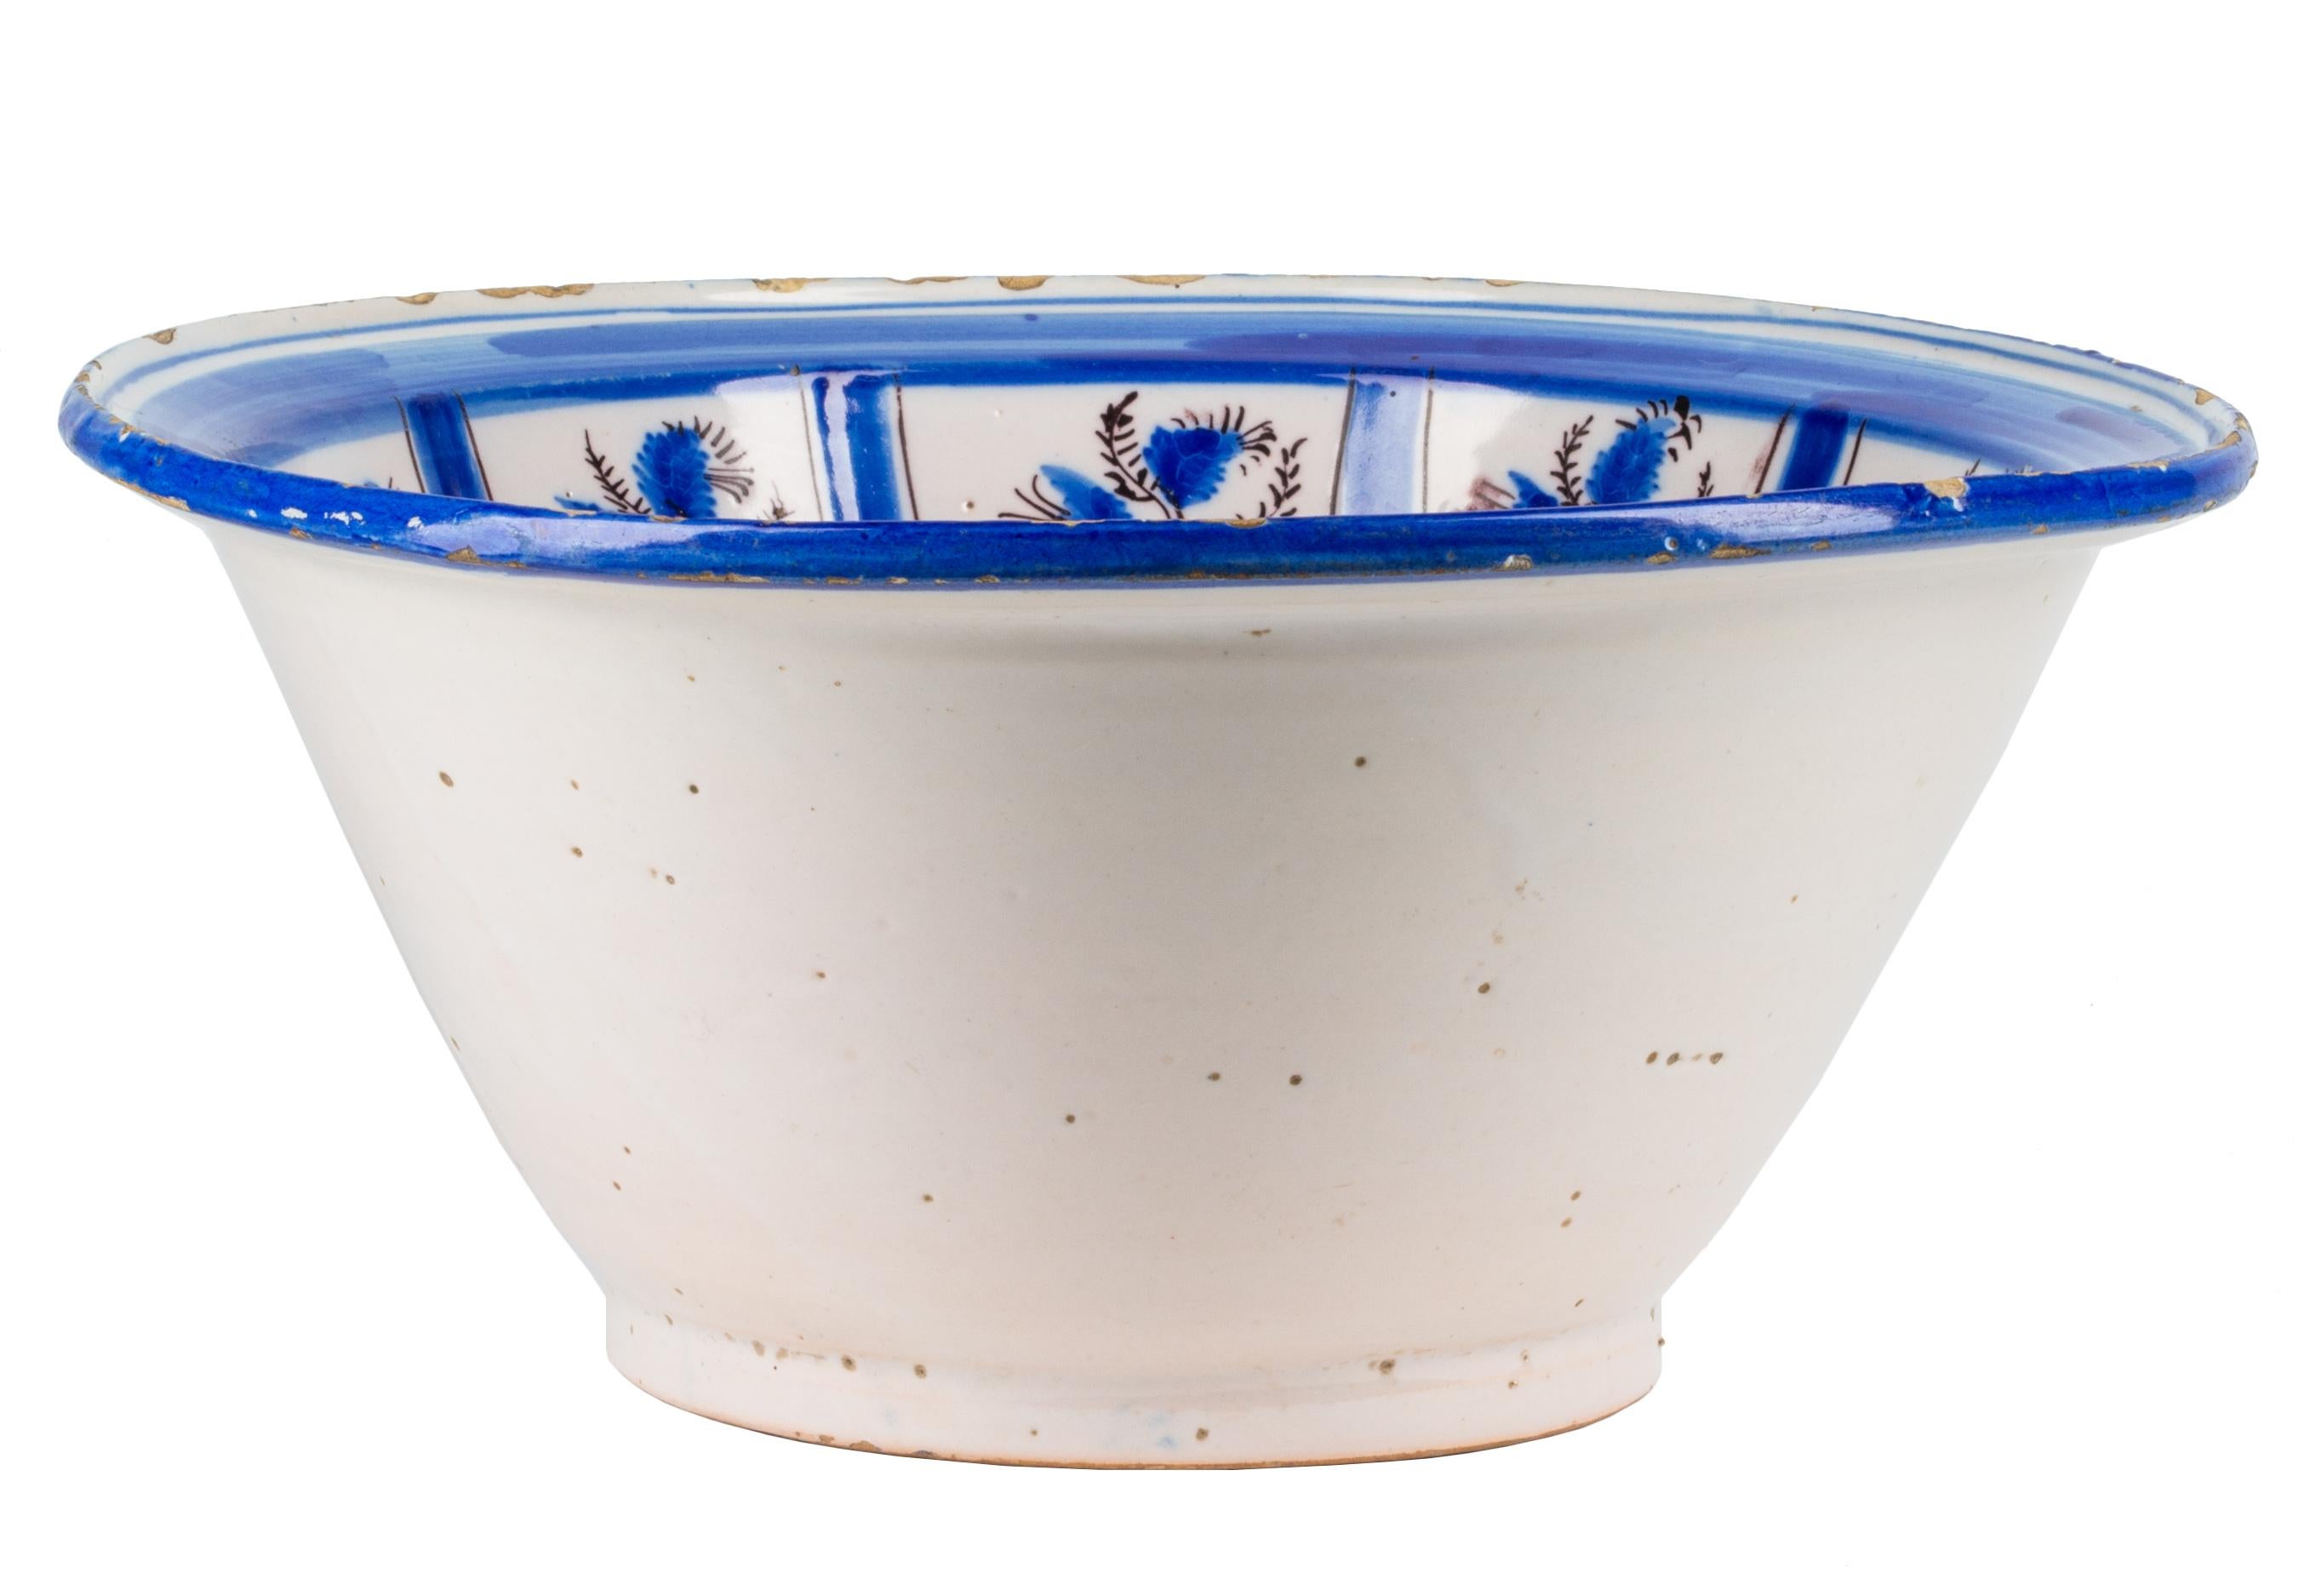 Made in the 19th century, this brightly colored blue and white bowl from Manises, Spain is highly decorative, and it once served the very specific household purpose of holding chestnuts - hence this type of bowl is known as a 